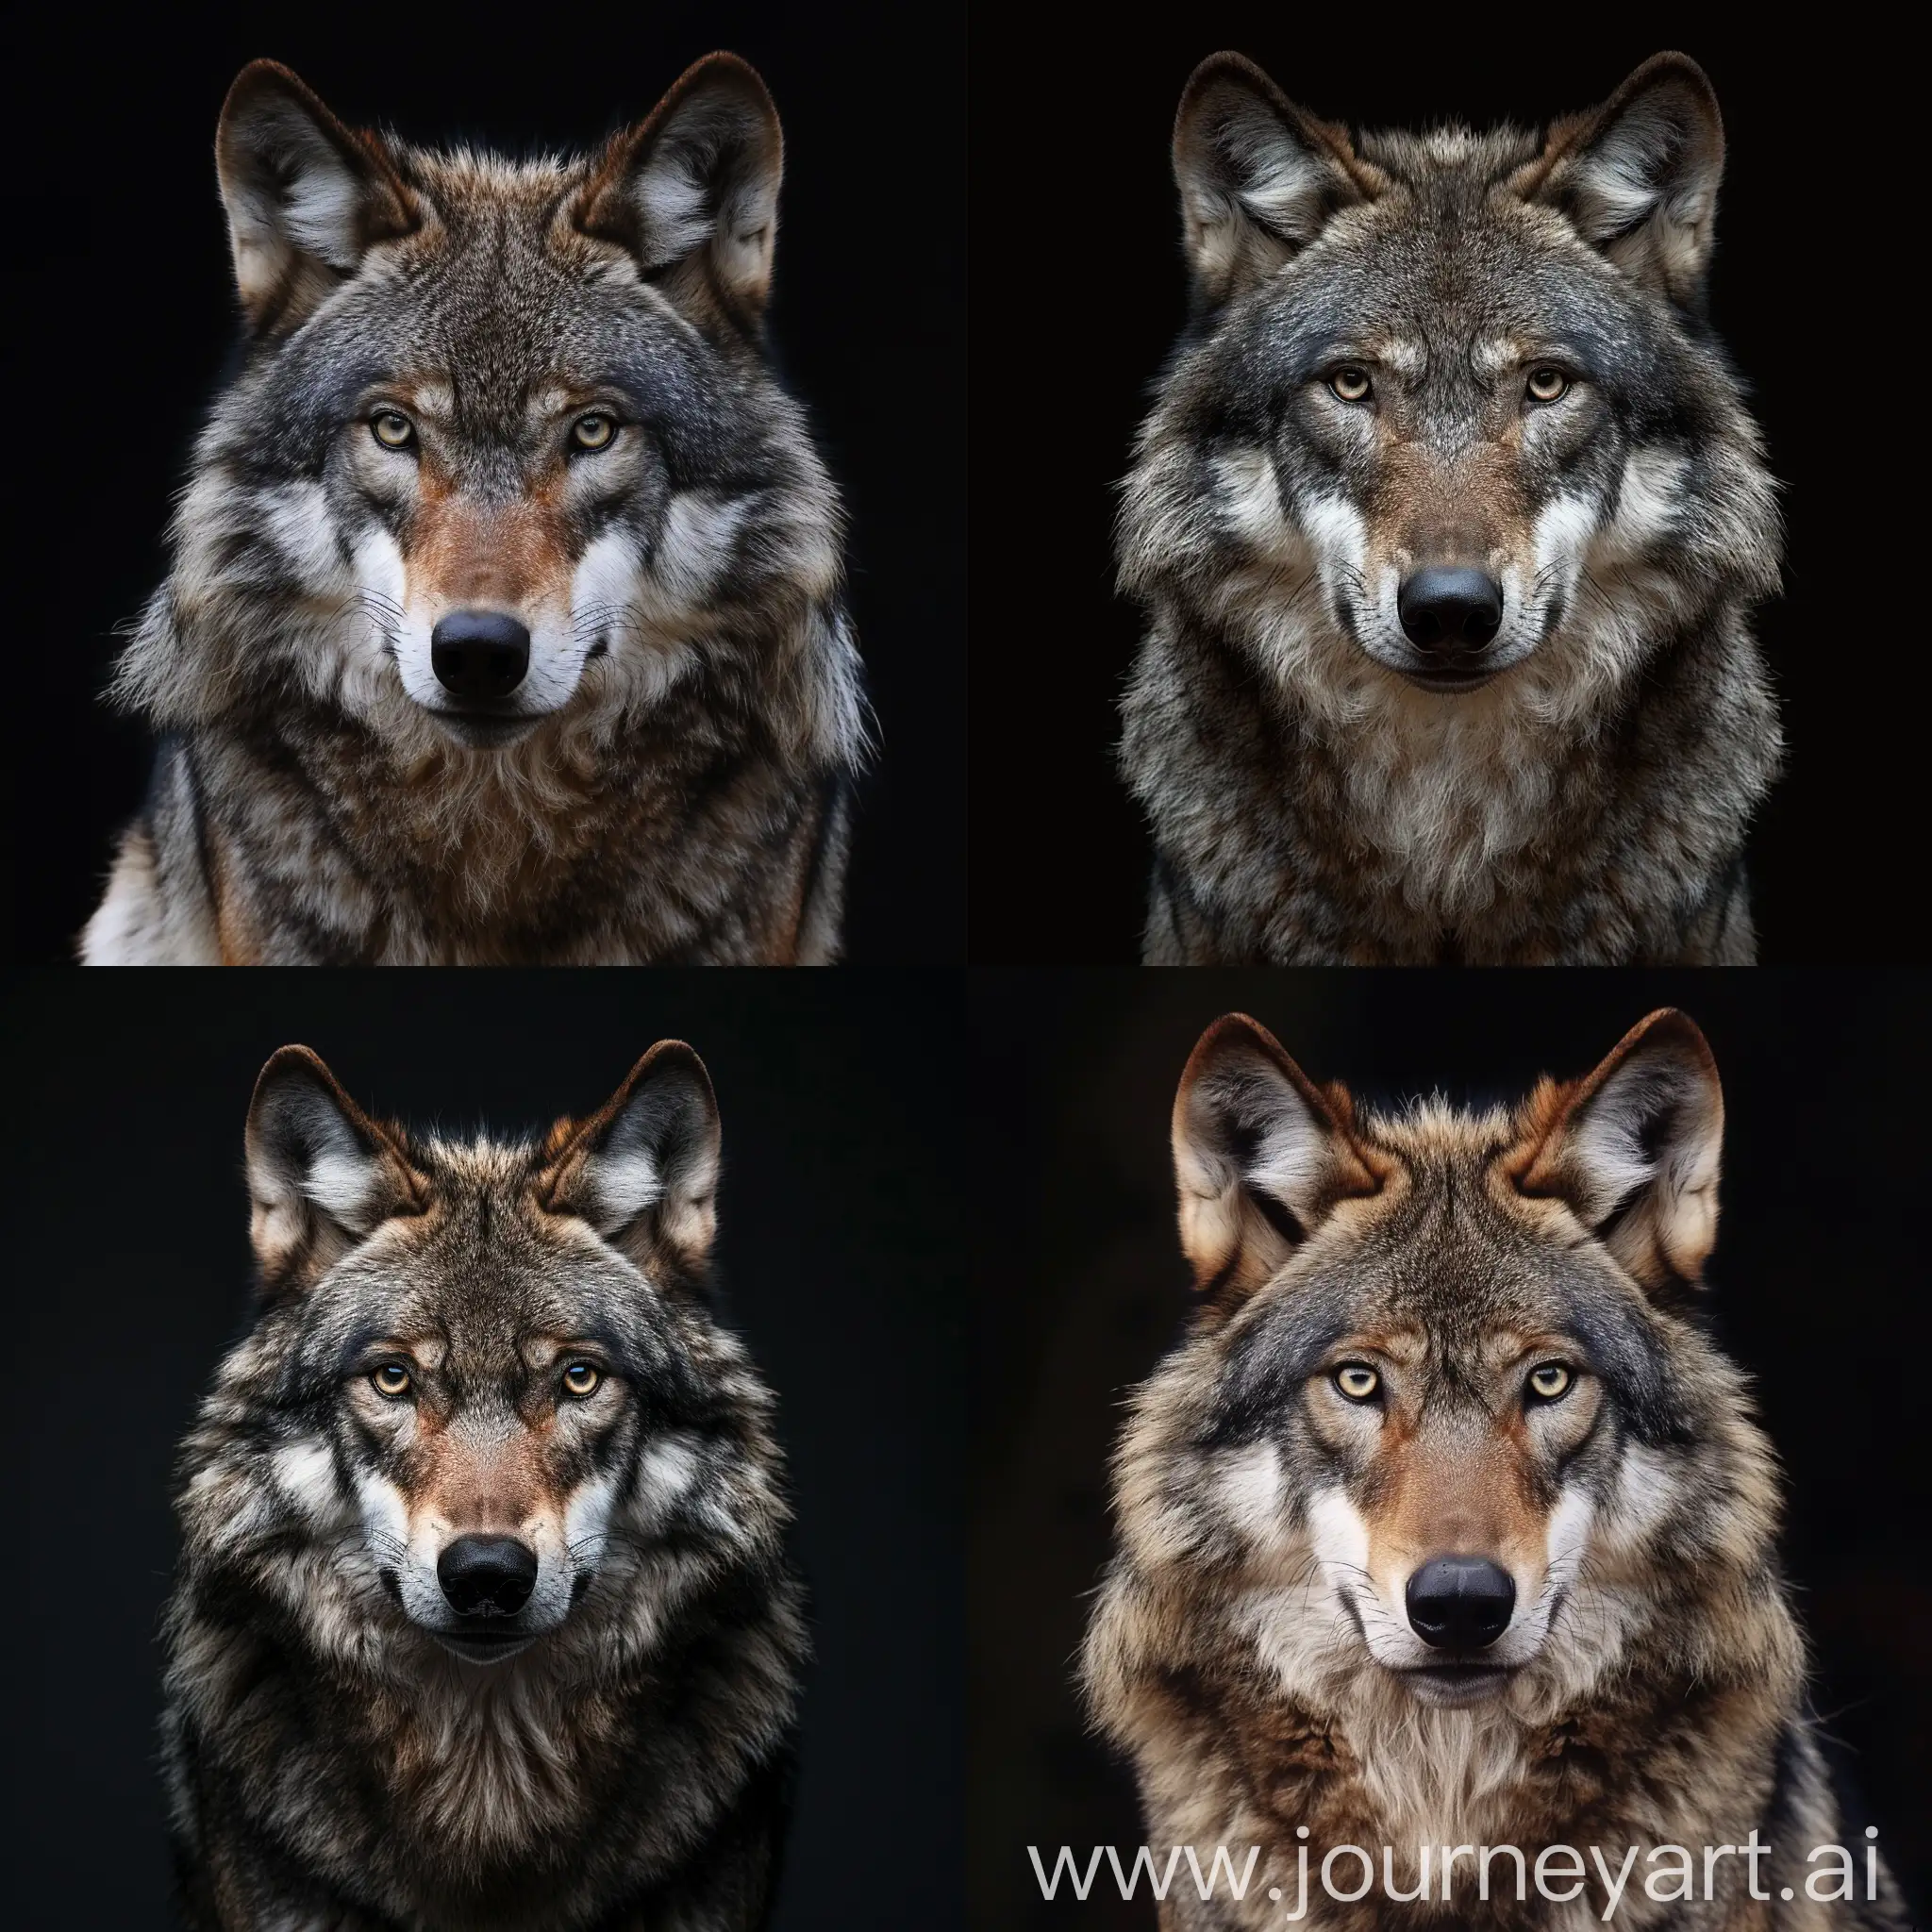 photorealistic image of a wolf with background black
